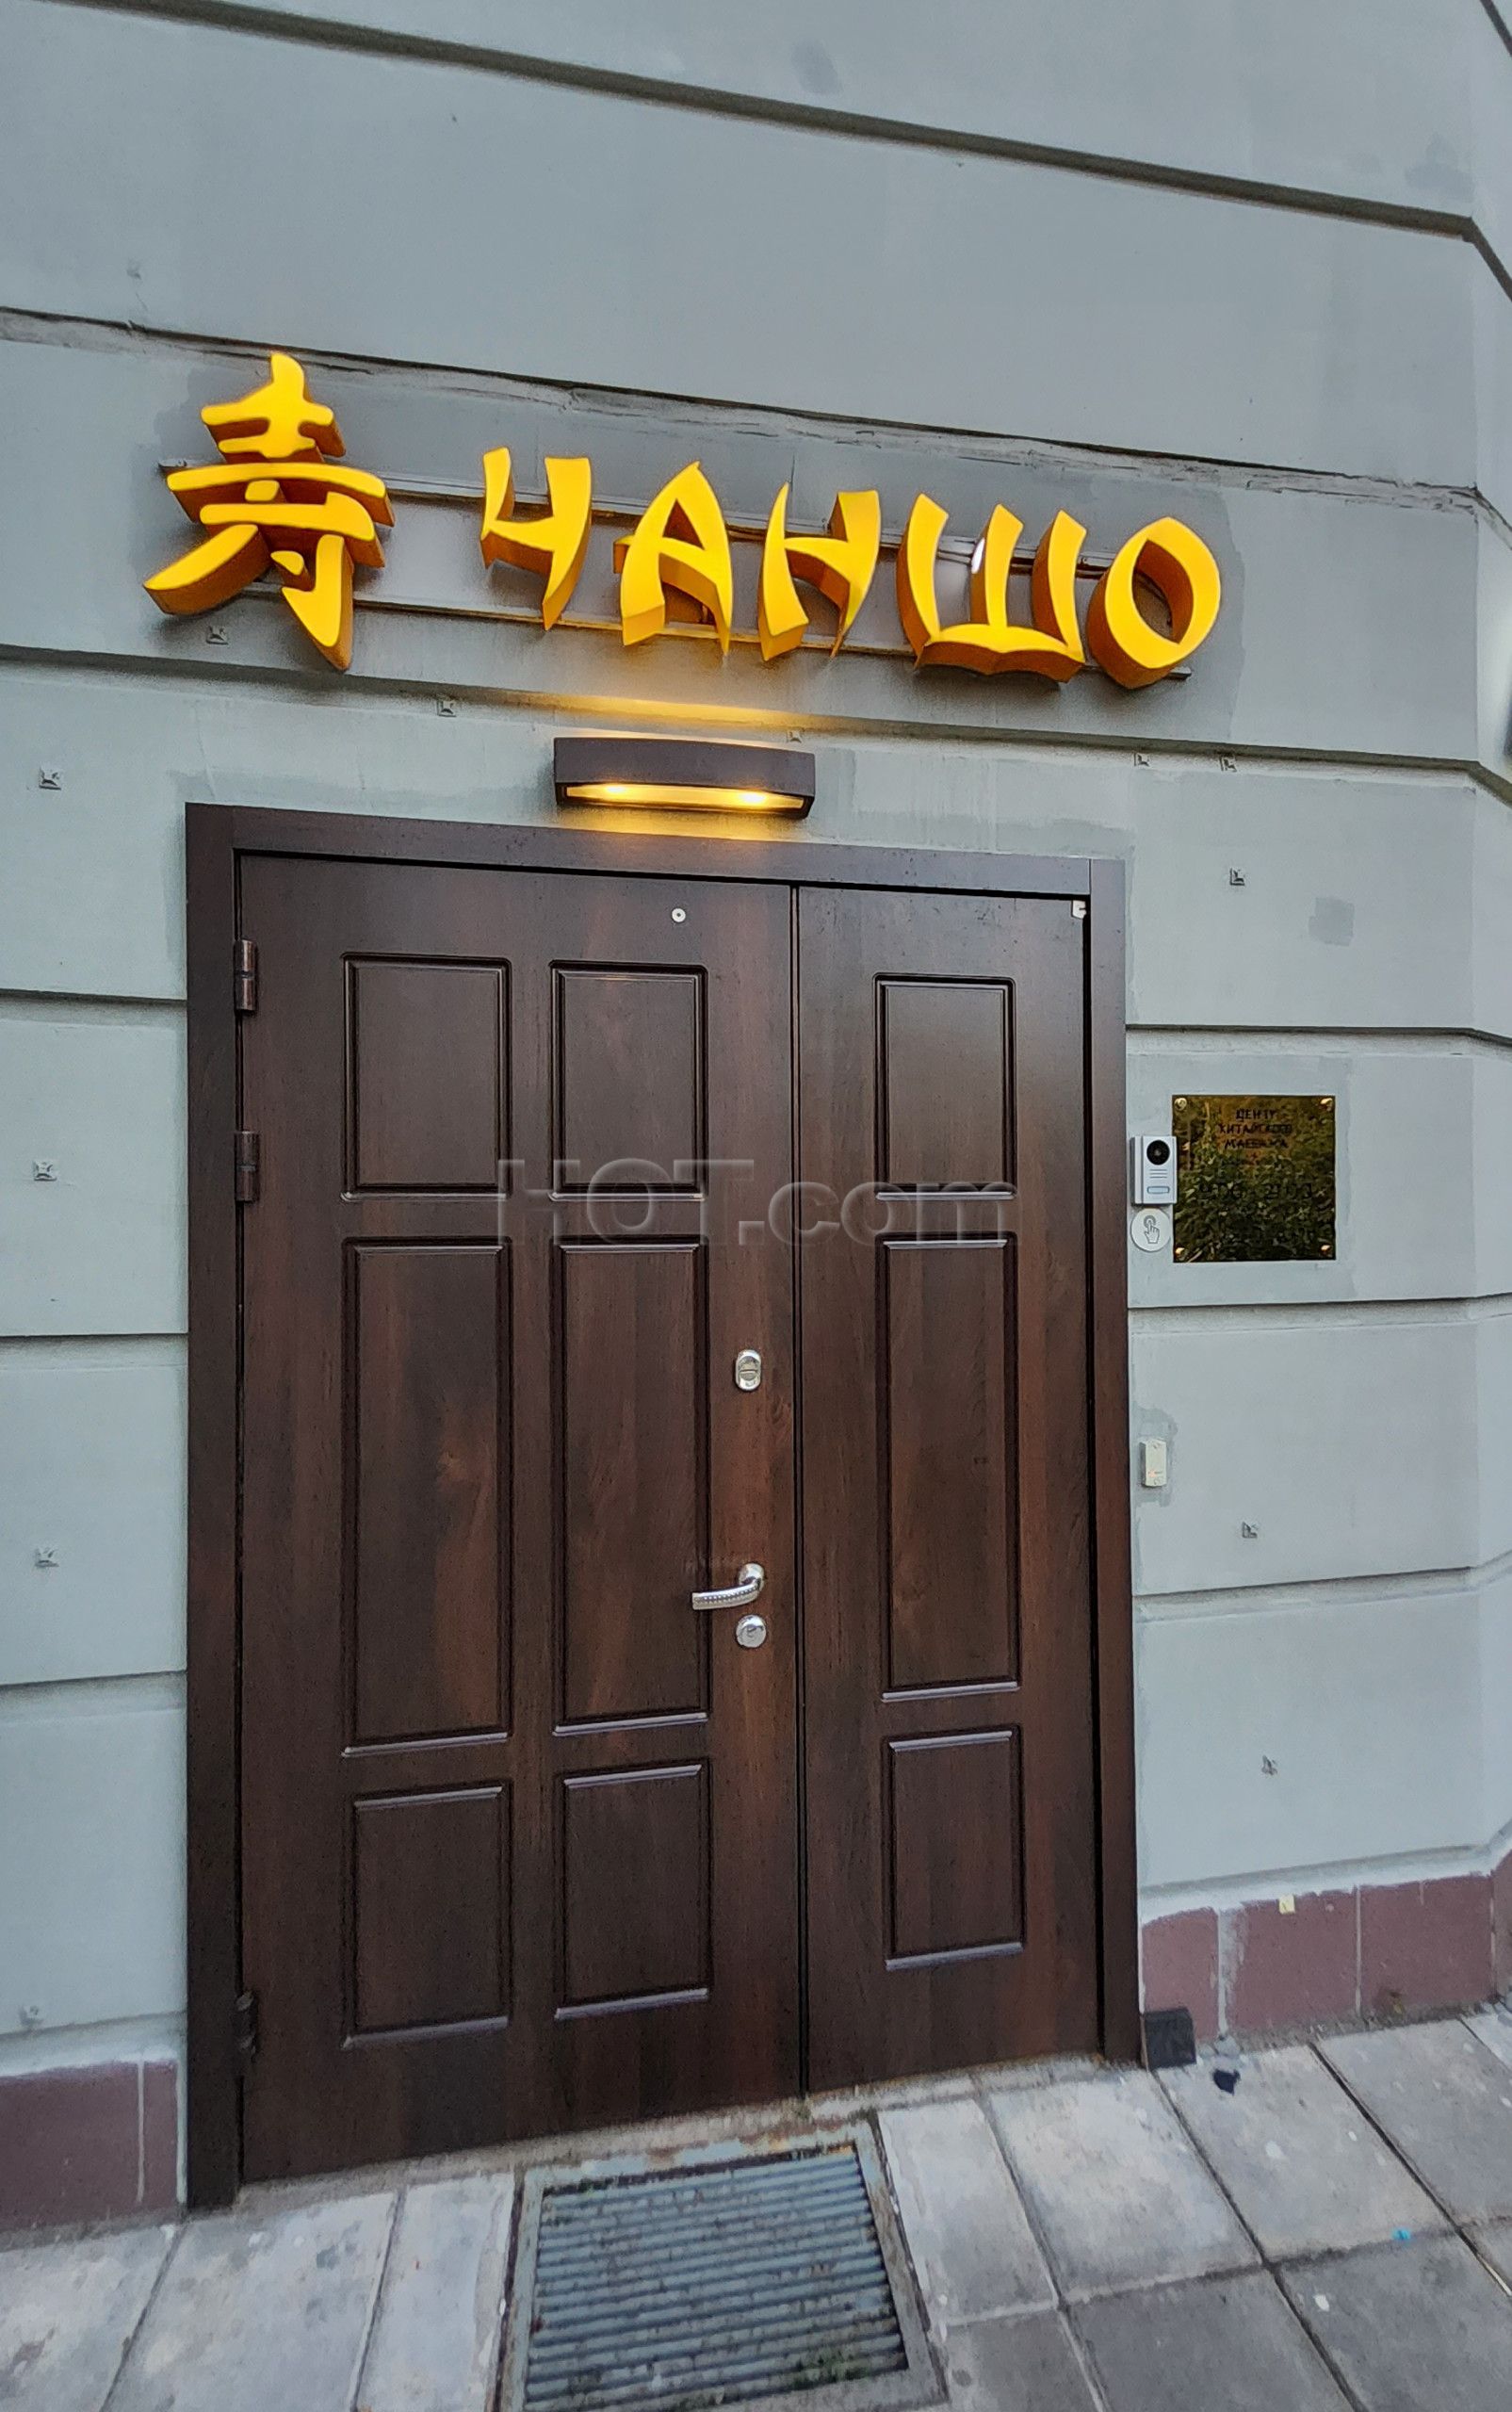 Moscow, Russia Chinese Massage Center "Chansho"